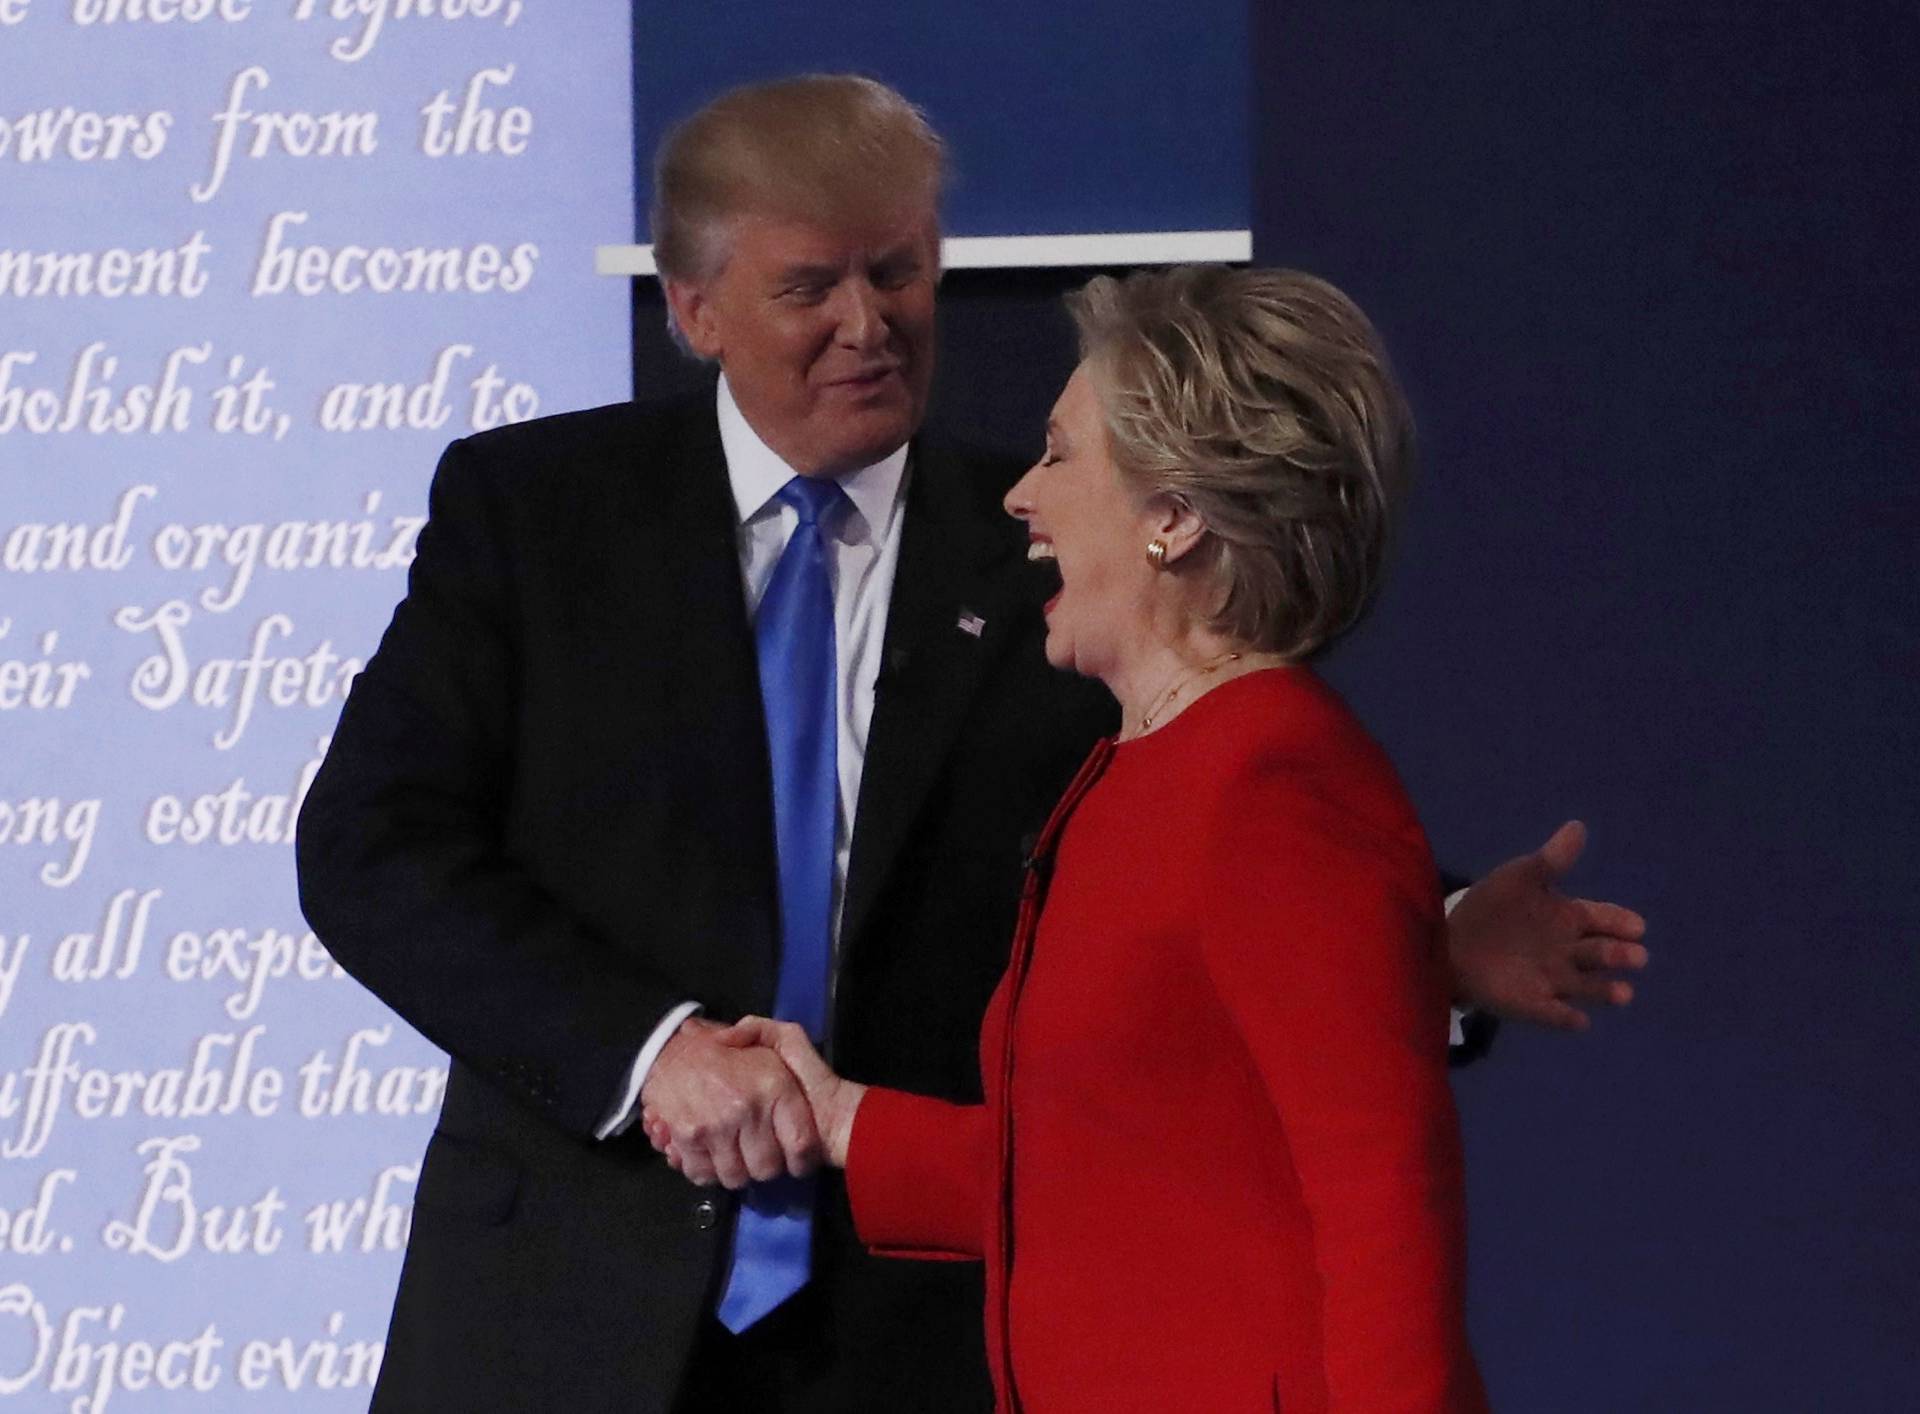 Republican U.S. presidential nominee Donald Trump shakes hands with Democratic U.S. presidential nominee Hillary Clinton at the conclusion of their first presidential debate at Hofstra University in Hempstead